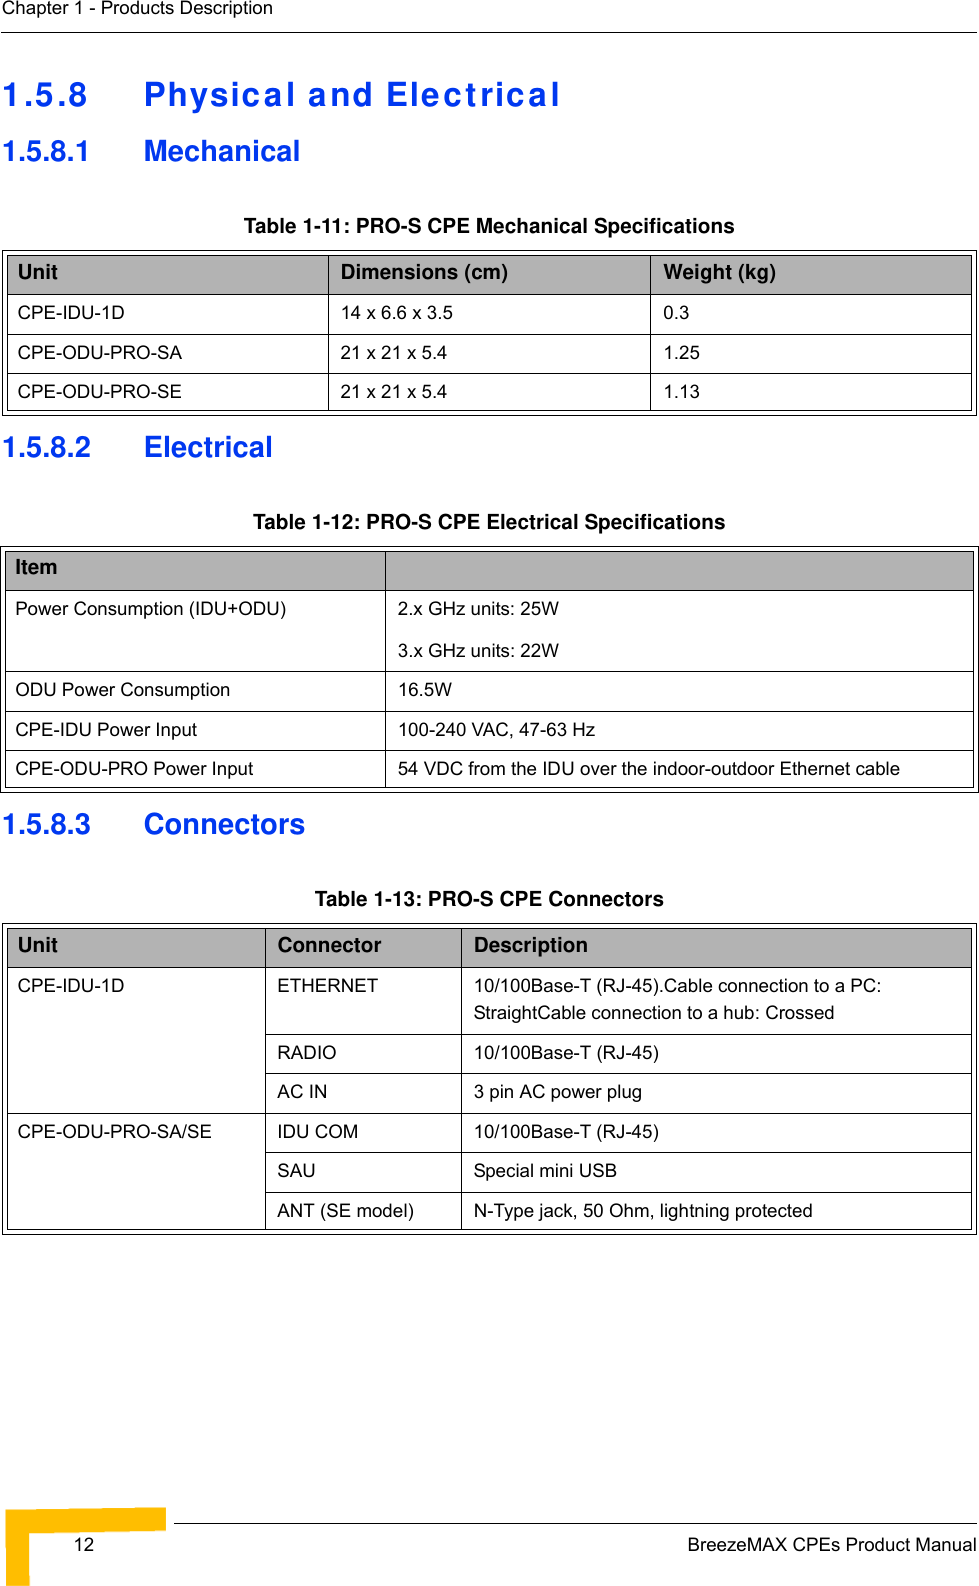 12 BreezeMAX CPEs Product ManualChapter 1 - Products Description1.5.8 Physical and Electrical 1.5.8.1 Mechanical 1.5.8.2 Electrical1.5.8.3 ConnectorsTable 1-11: PRO-S CPE Mechanical SpecificationsUnit Dimensions (cm) Weight (kg) CPE-IDU-1D 14 x 6.6 x 3.5 0.3CPE-ODU-PRO-SA 21 x 21 x 5.4 1.25CPE-ODU-PRO-SE 21 x 21 x 5.4 1.13Table 1-12: PRO-S CPE Electrical SpecificationsItemPower Consumption (IDU+ODU) 2.x GHz units: 25W3.x GHz units: 22WODU Power Consumption 16.5WCPE-IDU Power Input 100-240 VAC, 47-63 HzCPE-ODU-PRO Power Input 54 VDC from the IDU over the indoor-outdoor Ethernet cableTable 1-13: PRO-S CPE ConnectorsUnit Connector DescriptionCPE-IDU-1D ETHERNET 10/100Base-T (RJ-45).Cable connection to a PC: StraightCable connection to a hub: CrossedRADIO 10/100Base-T (RJ-45)AC IN 3 pin AC power plugCPE-ODU-PRO-SA/SE IDU COM 10/100Base-T (RJ-45)SAU Special mini USBANT (SE model) N-Type jack, 50 Ohm, lightning protected